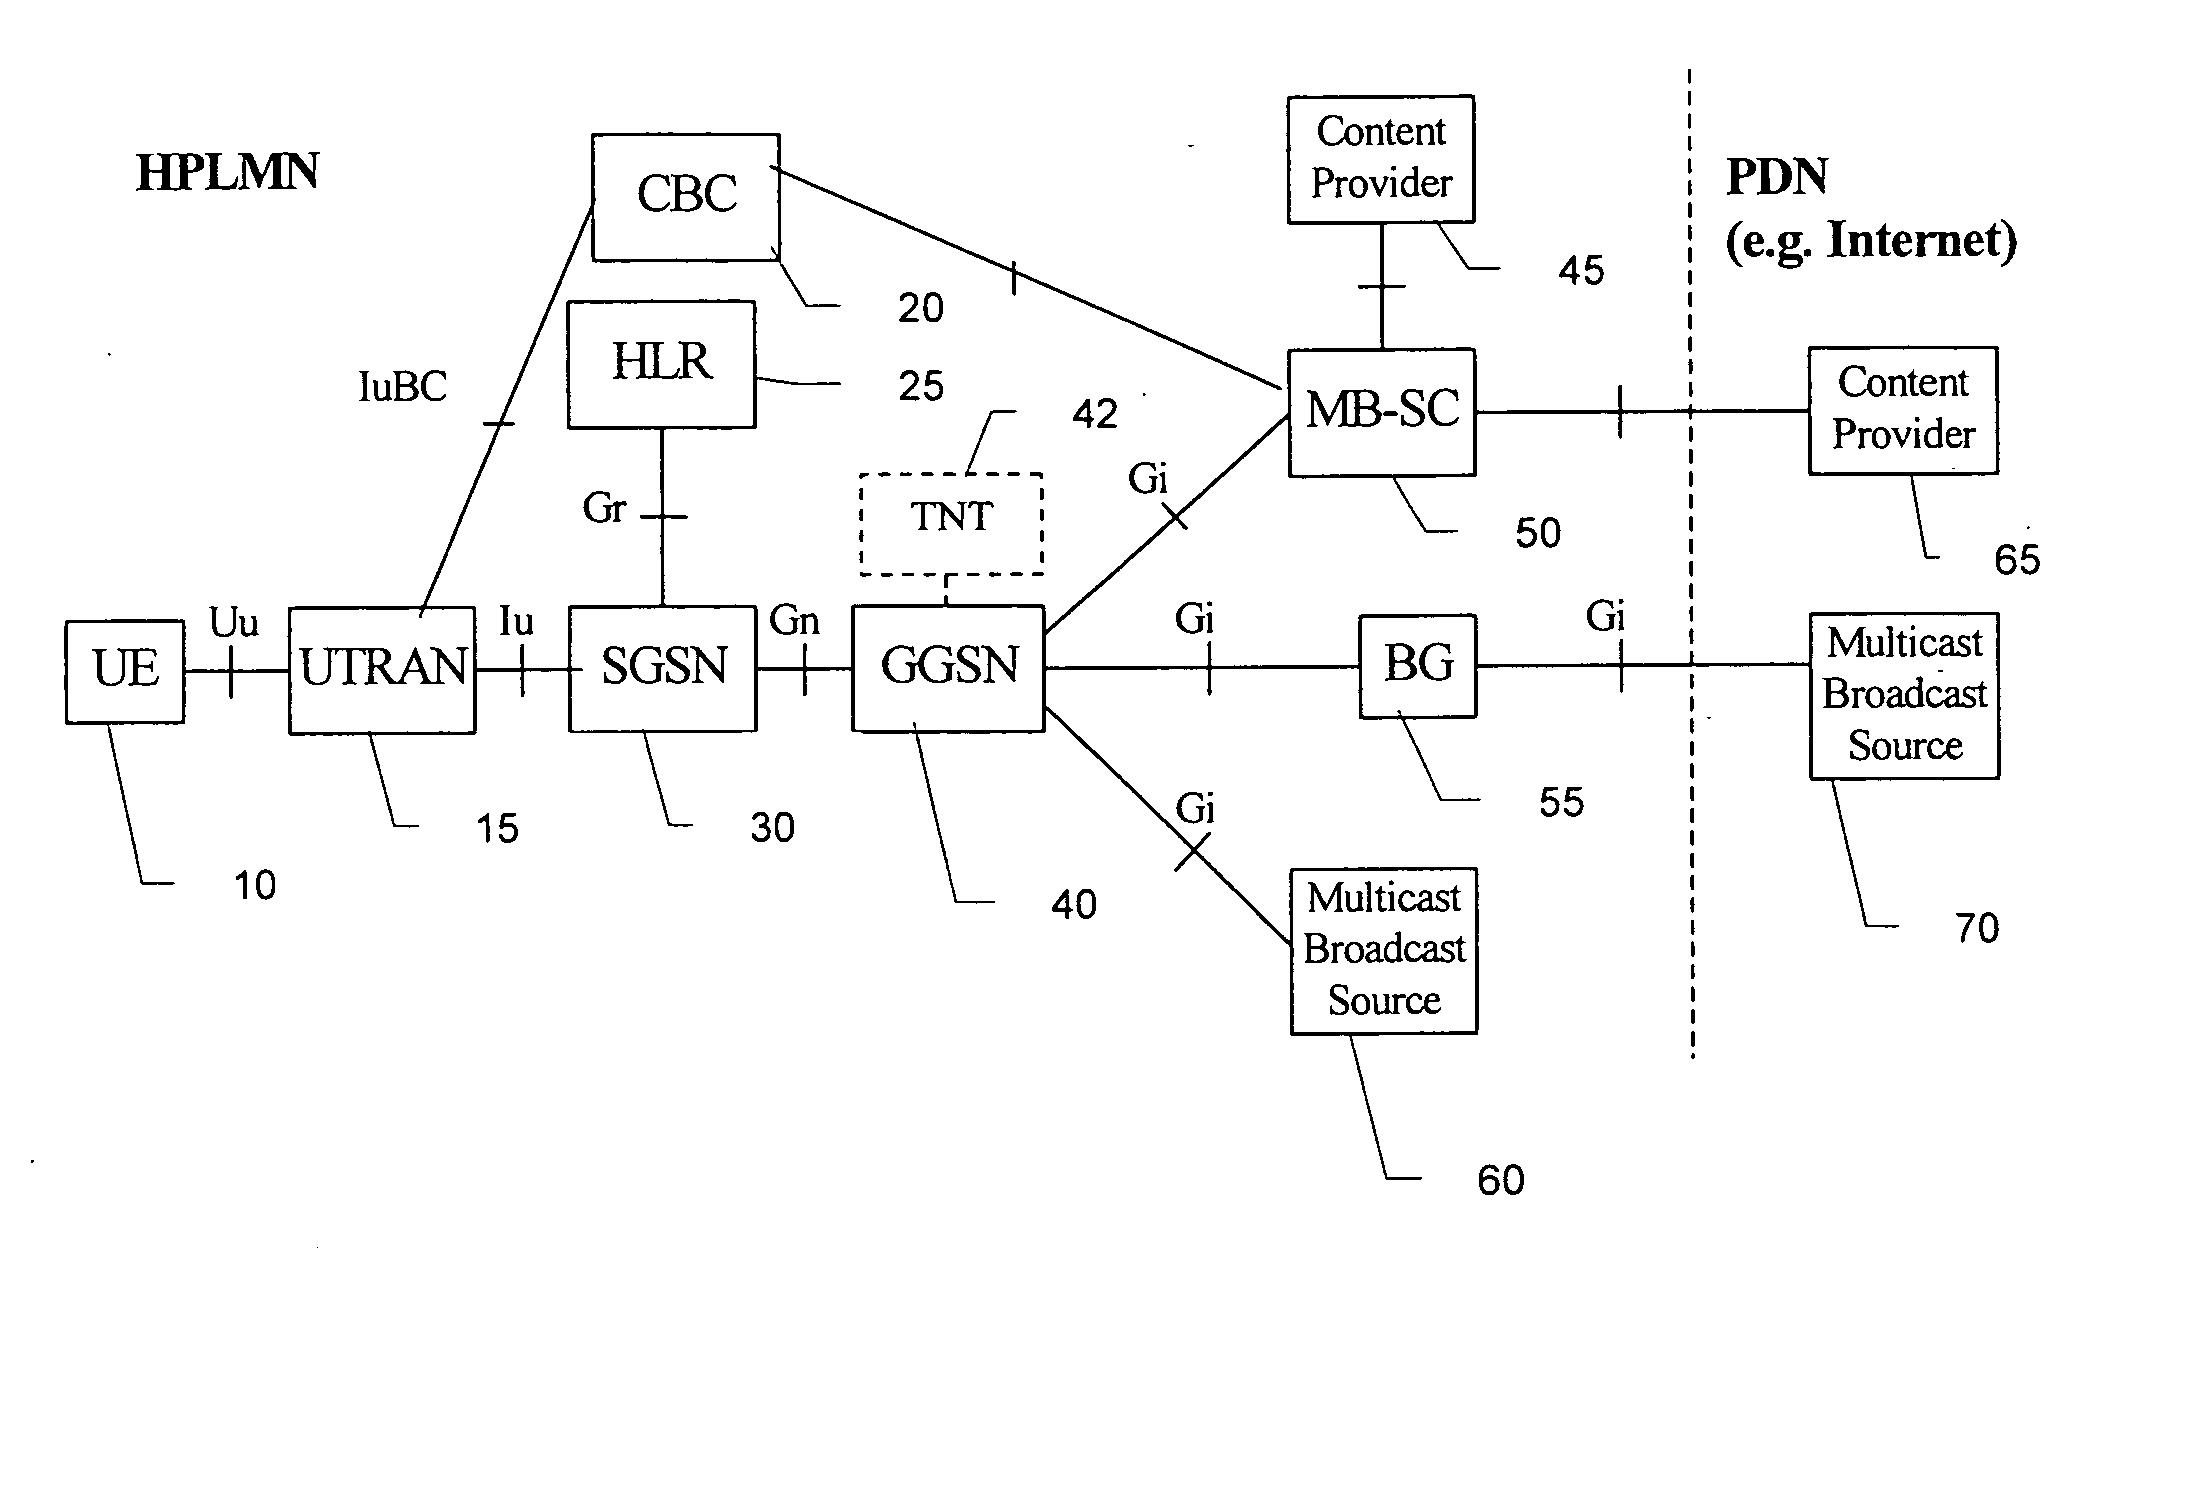 Method and system for setting up a multicast or broadcast transmission